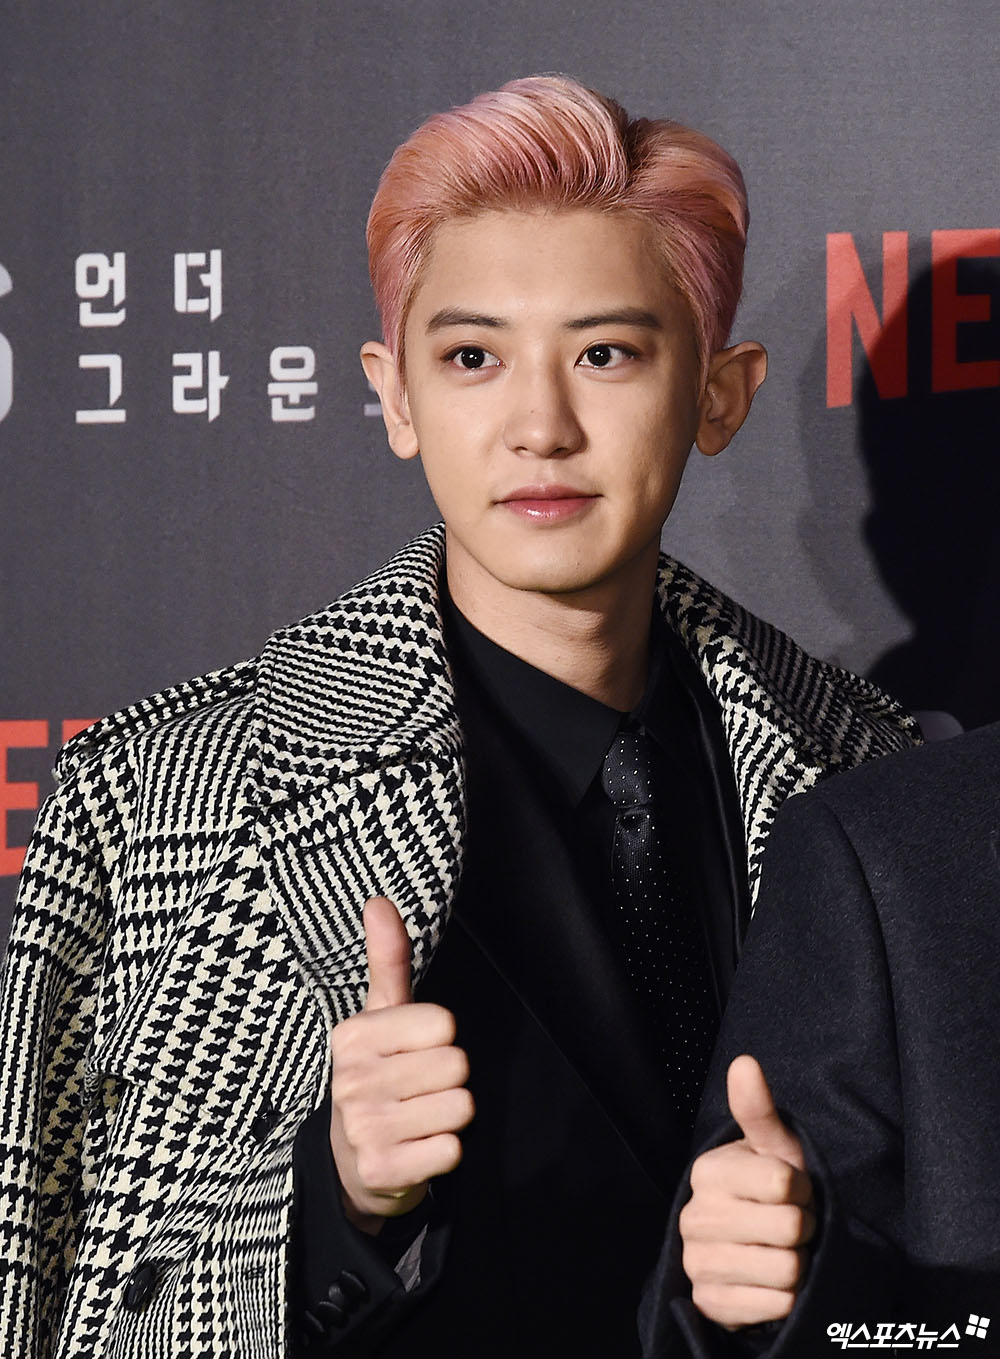 EXO Chanyeol, Kai, Suho, Chen, Baekhyun and Sehun, who attended the Netflix 6 Underground green carpet event held at Dongdaemun Design Plaza (DDP) in Seoul on the afternoon of the 2nd, have photo time.Chanyeol bright smiles melting in the coldChanyeol Thumb Chuck VisualKai Black CharismaKai soft eyesSuho Gorgeous VisualSuho Six Underground Green Carpets with youChen has a strong self-assertive eyeBaekhyun - Chen visual of the earldomBaekhyun Olkill with EyesSehun Princes BeautySehun Visual Nam-shin